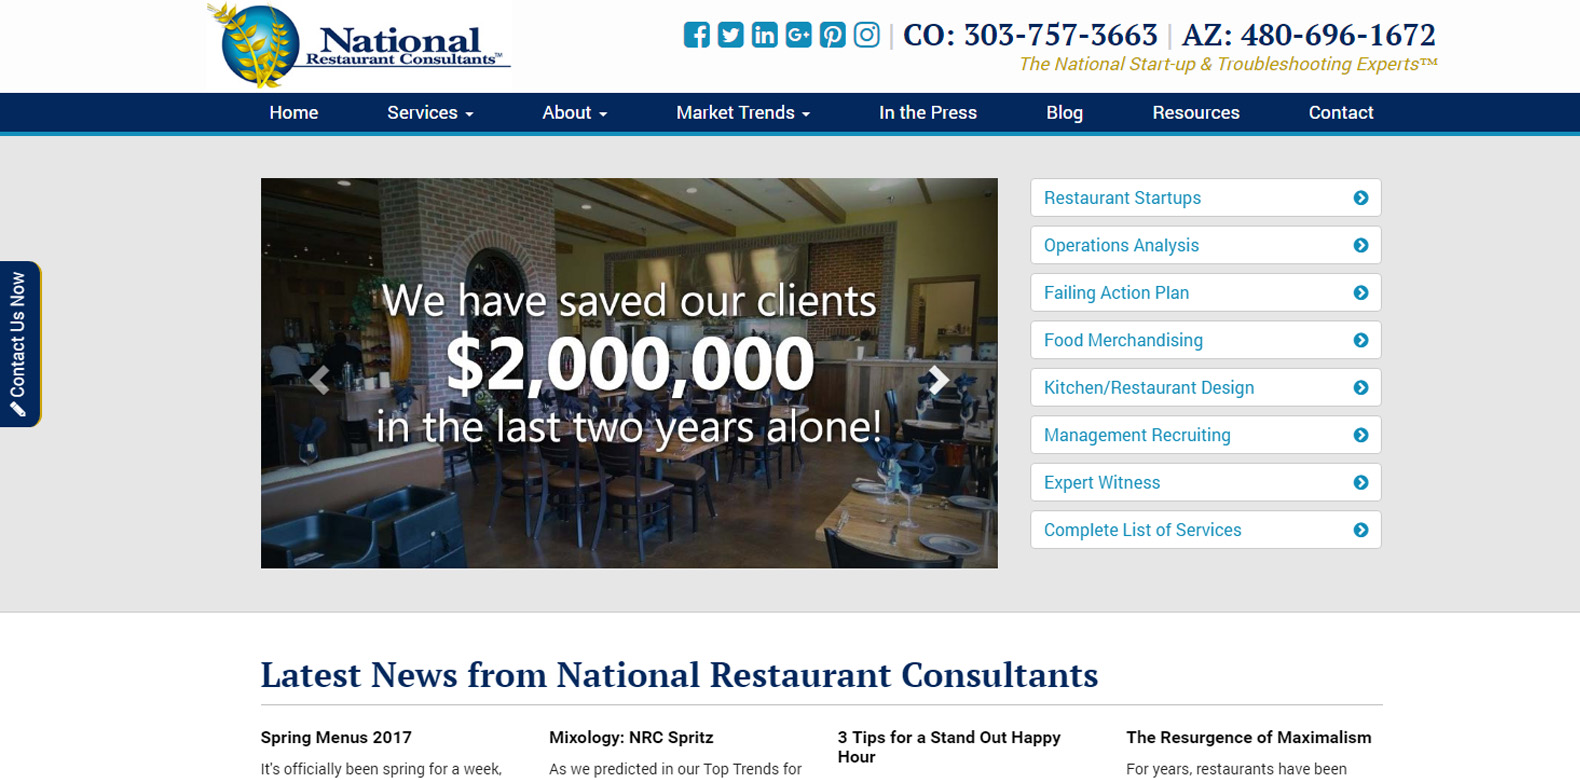 
New Upgrade Launched: National Restaurant Consultants